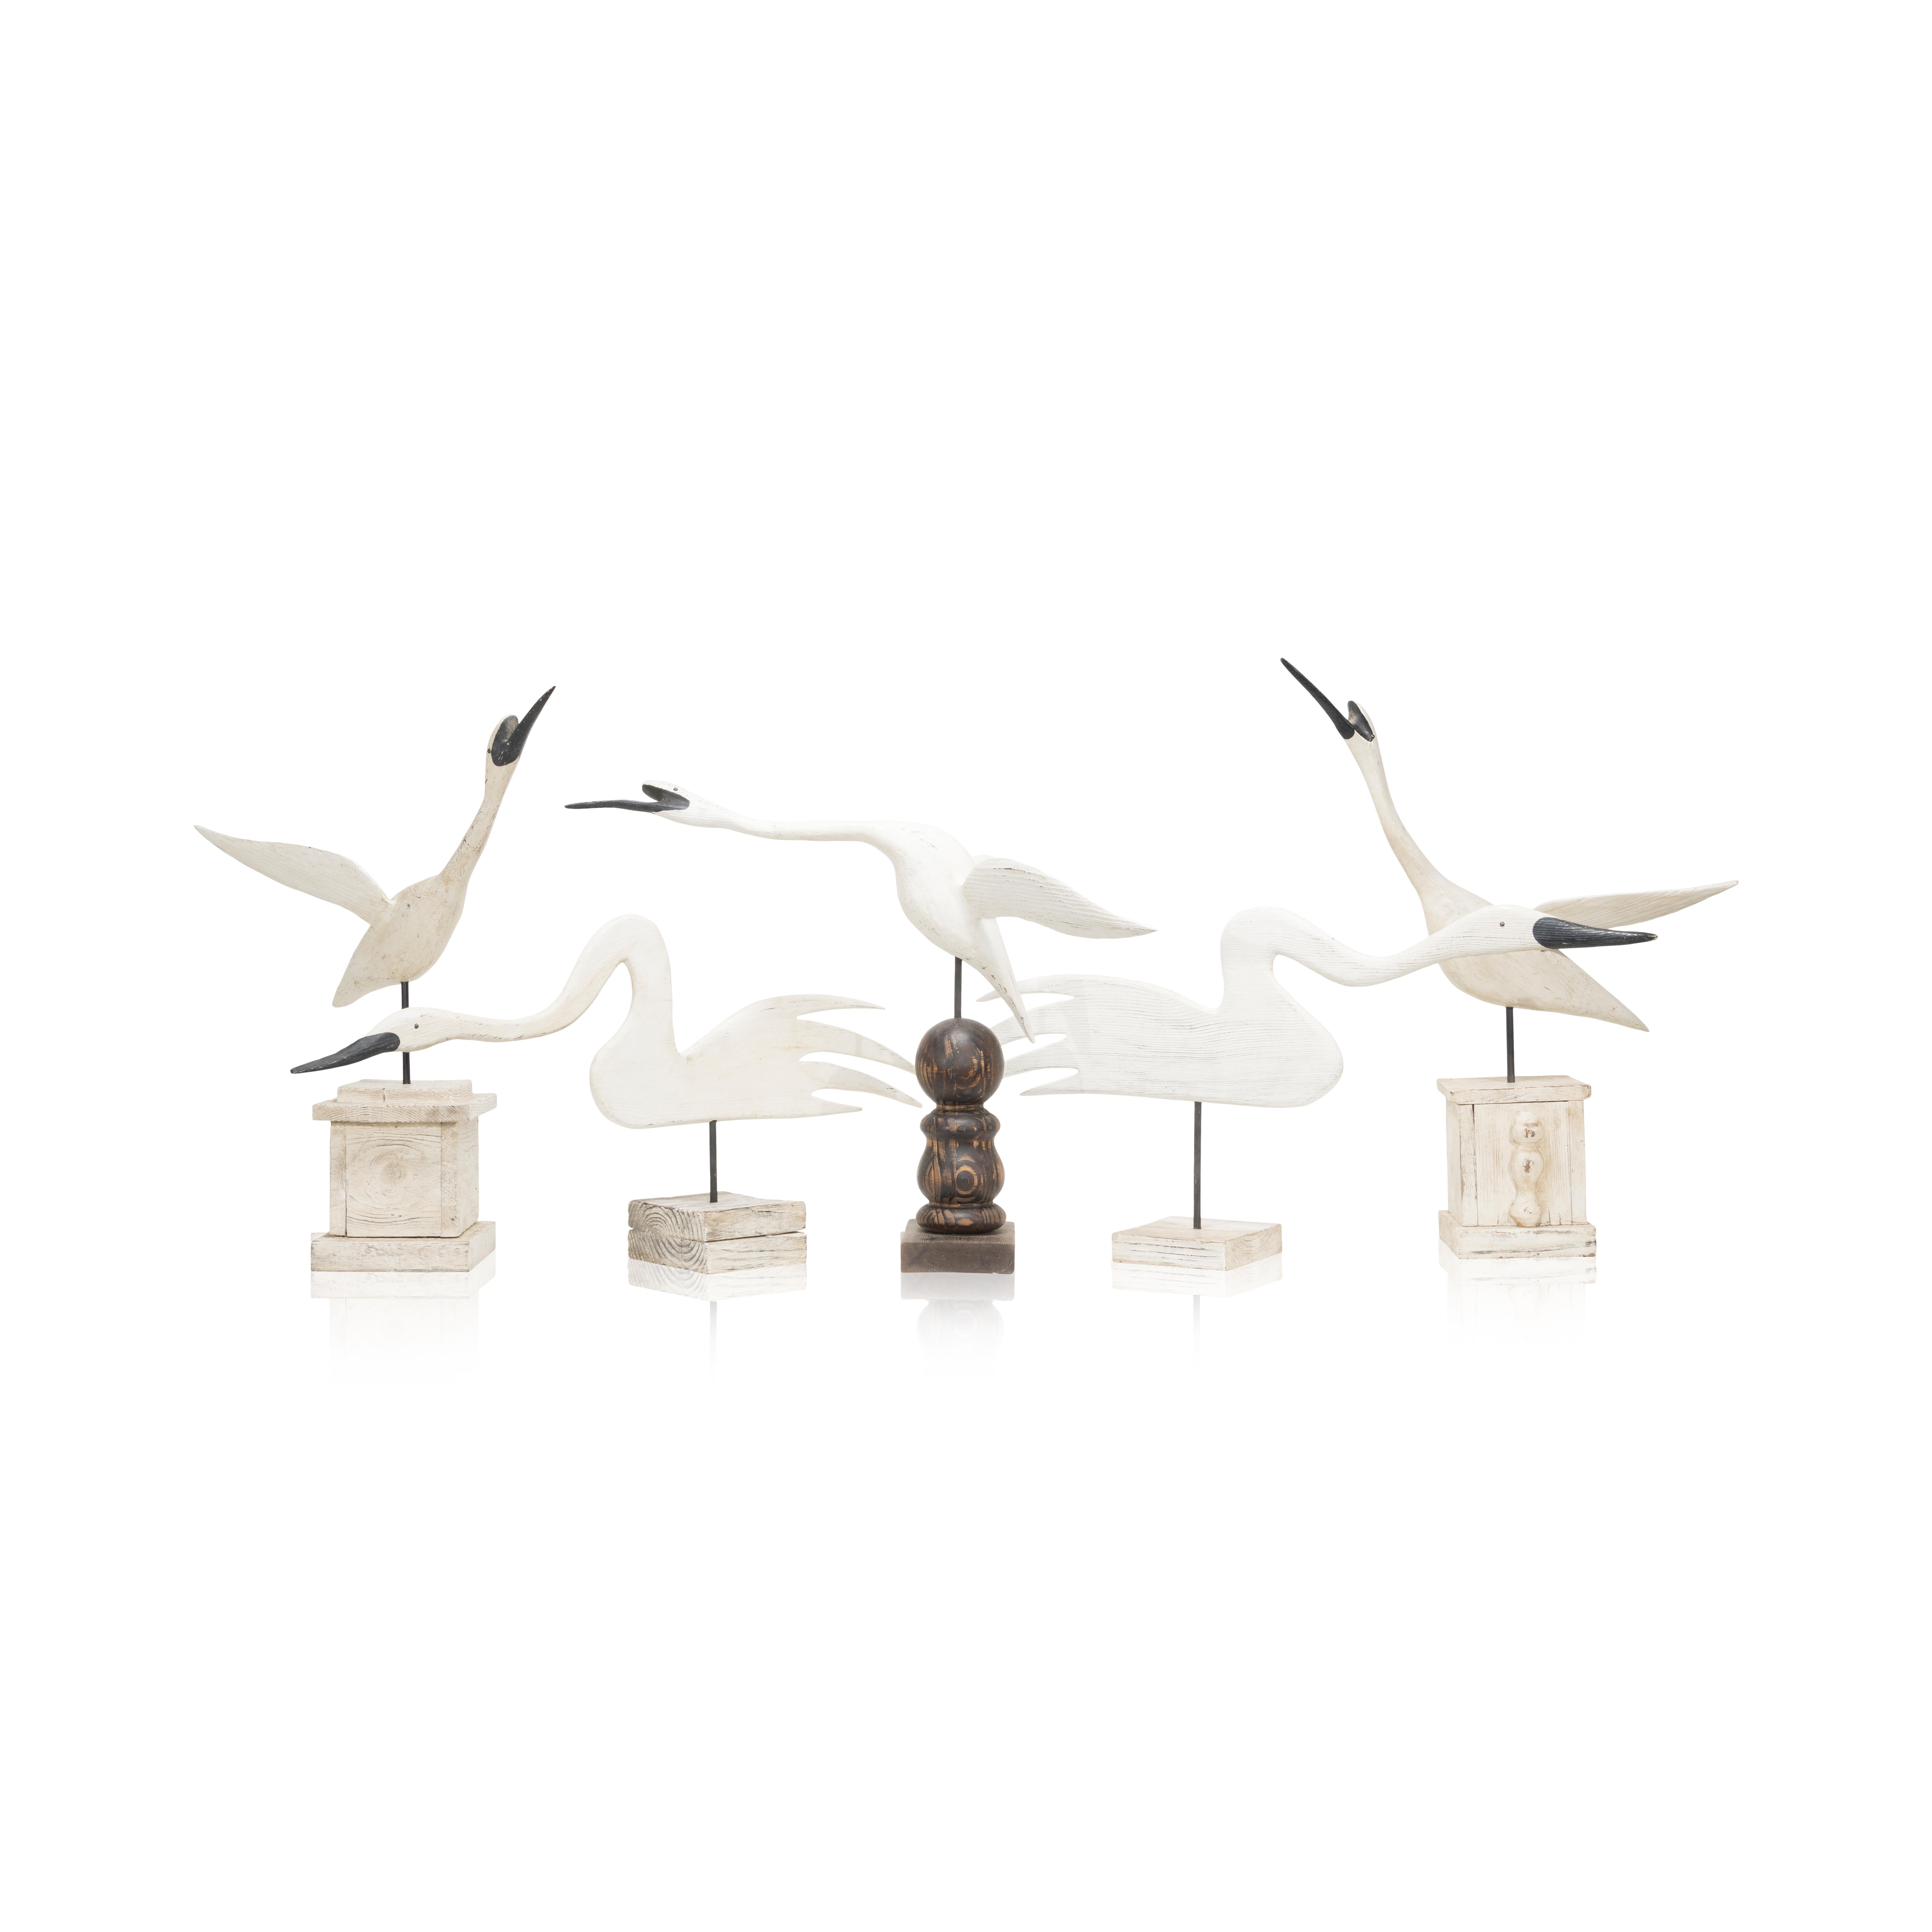 Flock of Wayne Baker (Virginia) shorebird decoys. Painted wood consisting of two schematic swans and three flying egrets painted in the round. Each is mounted to a wooden base. Signed on the underside by the carver.

Origin: Virginia
Period: Last